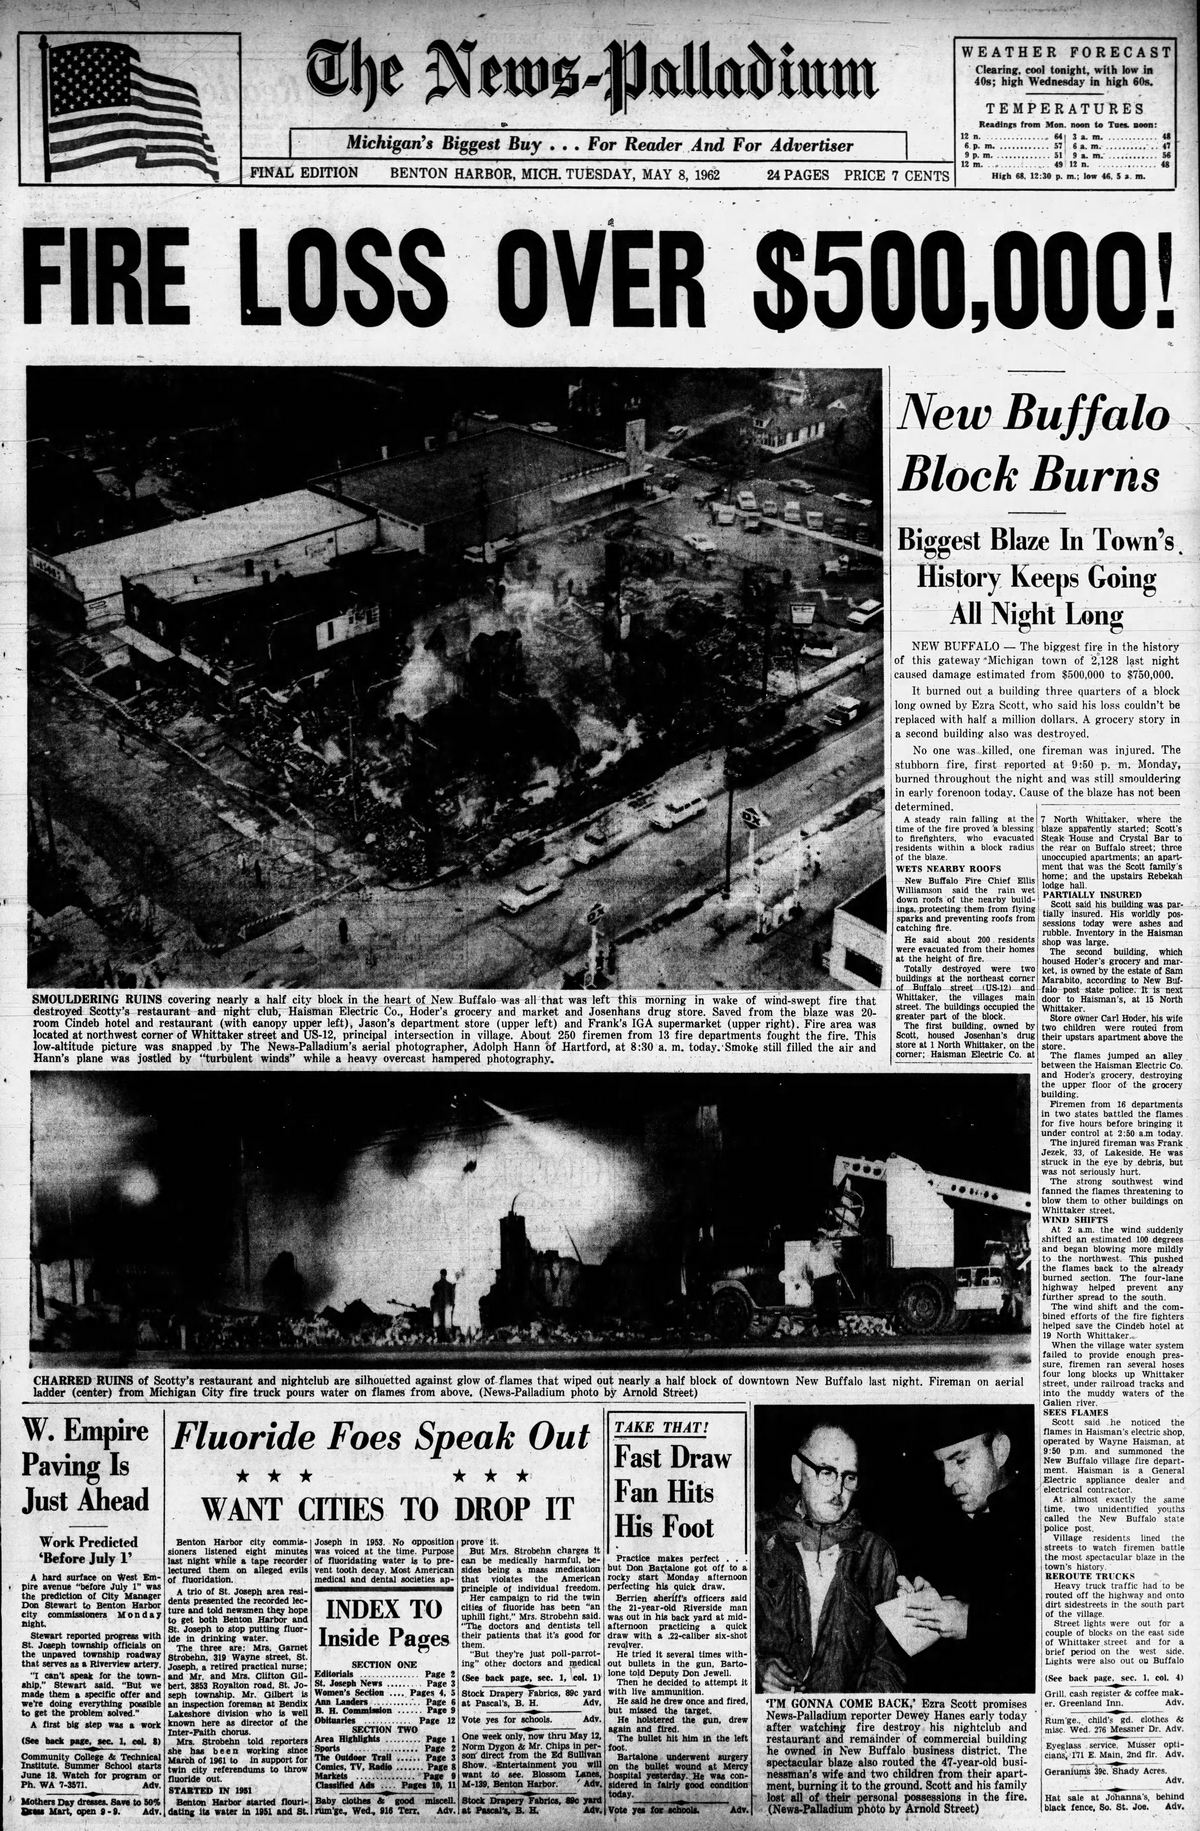 Josenhans Drug Store - May 8 1962 Article On Fire